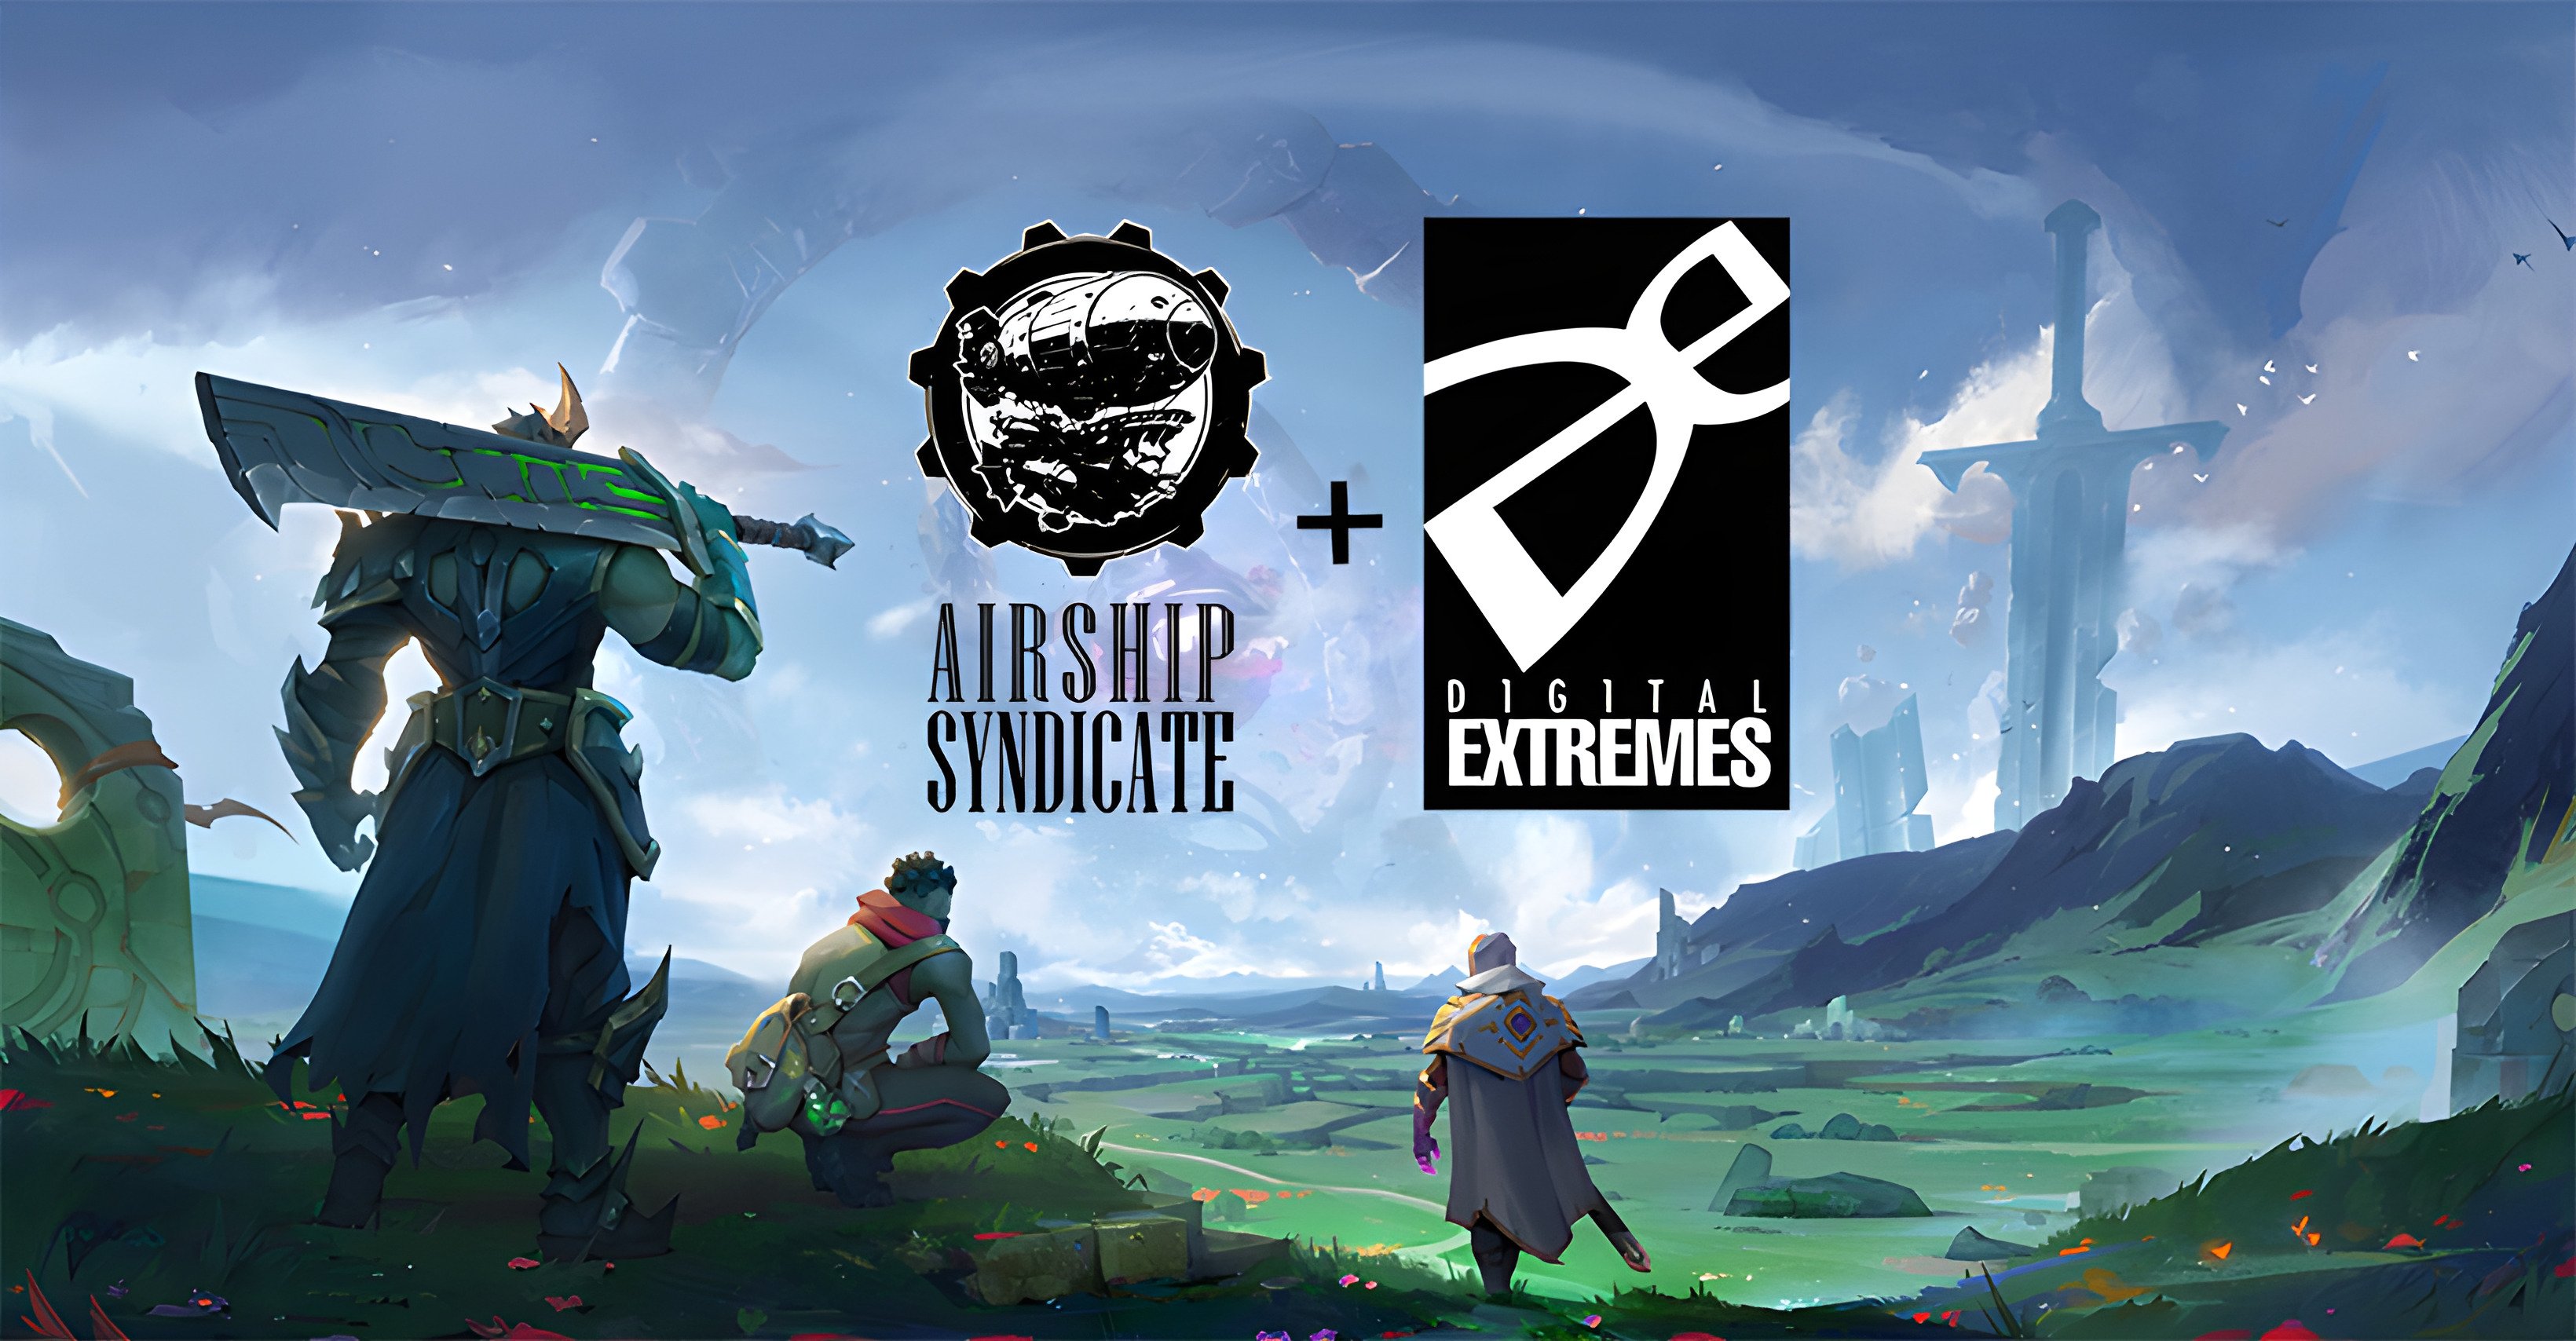 #
      Digital Extremes and Airship Syndicate announce free-to-play online fantasy action game